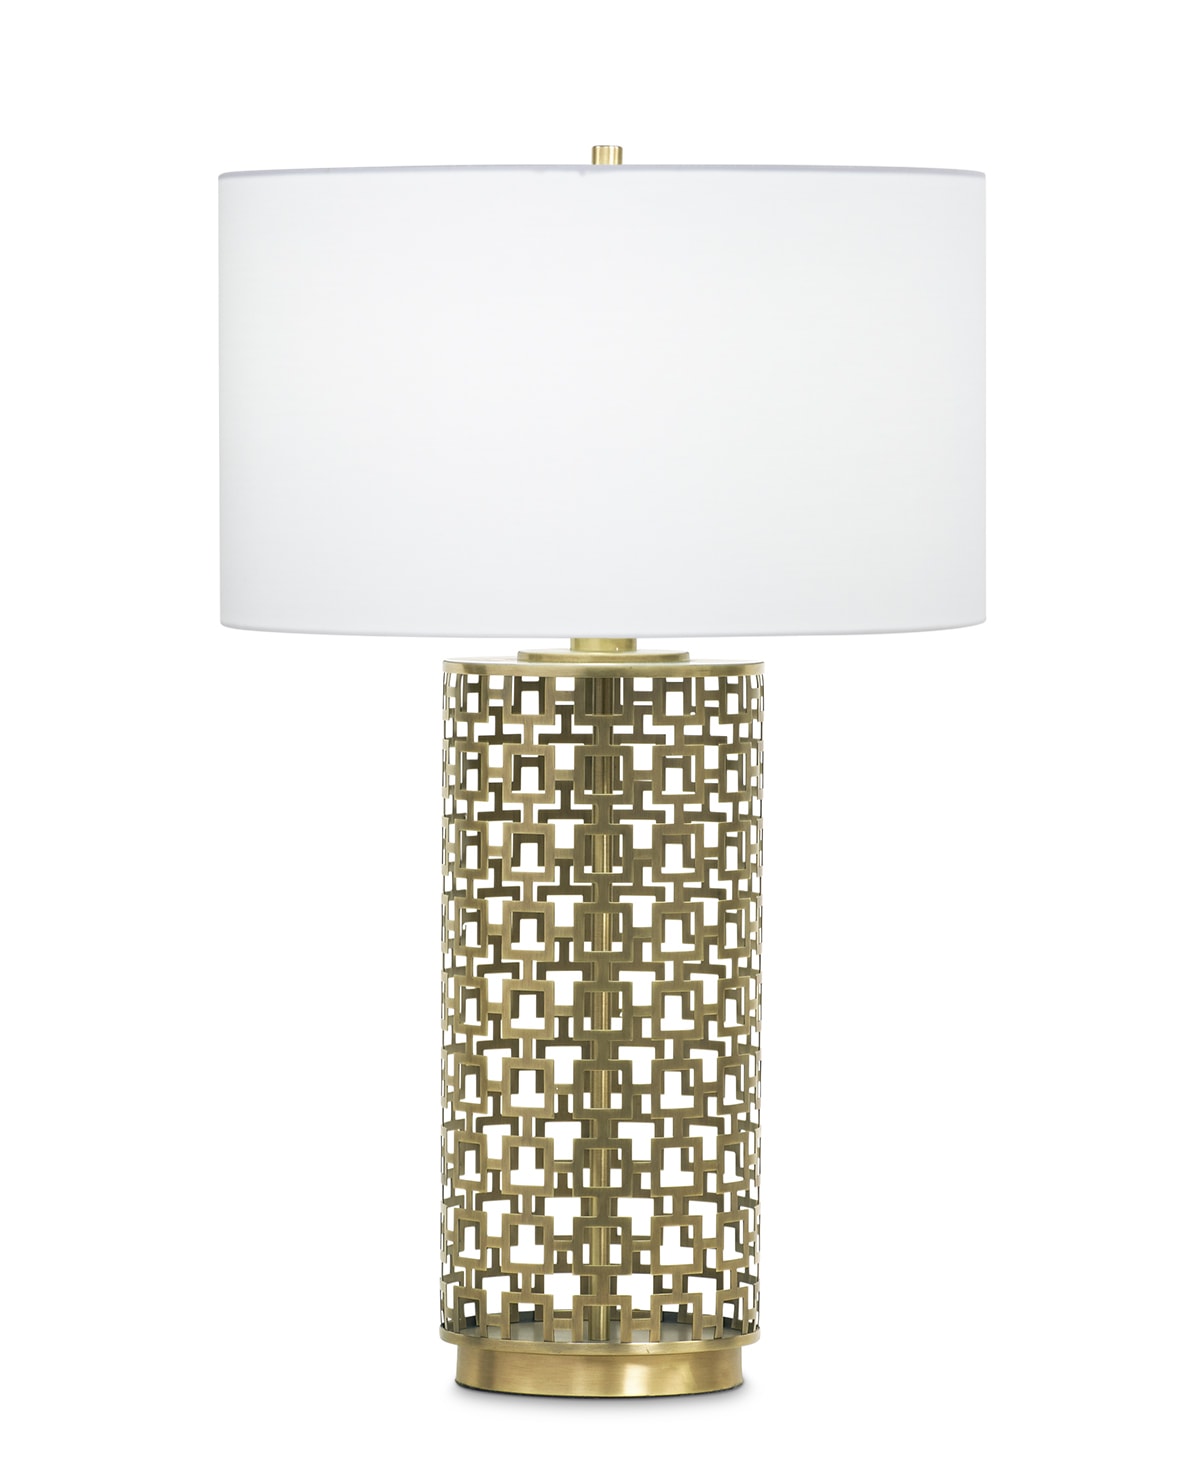 FlowDecor Aspen Table Lamp in metal with antique brass finish and off-white cotton drum shade (# 3643)